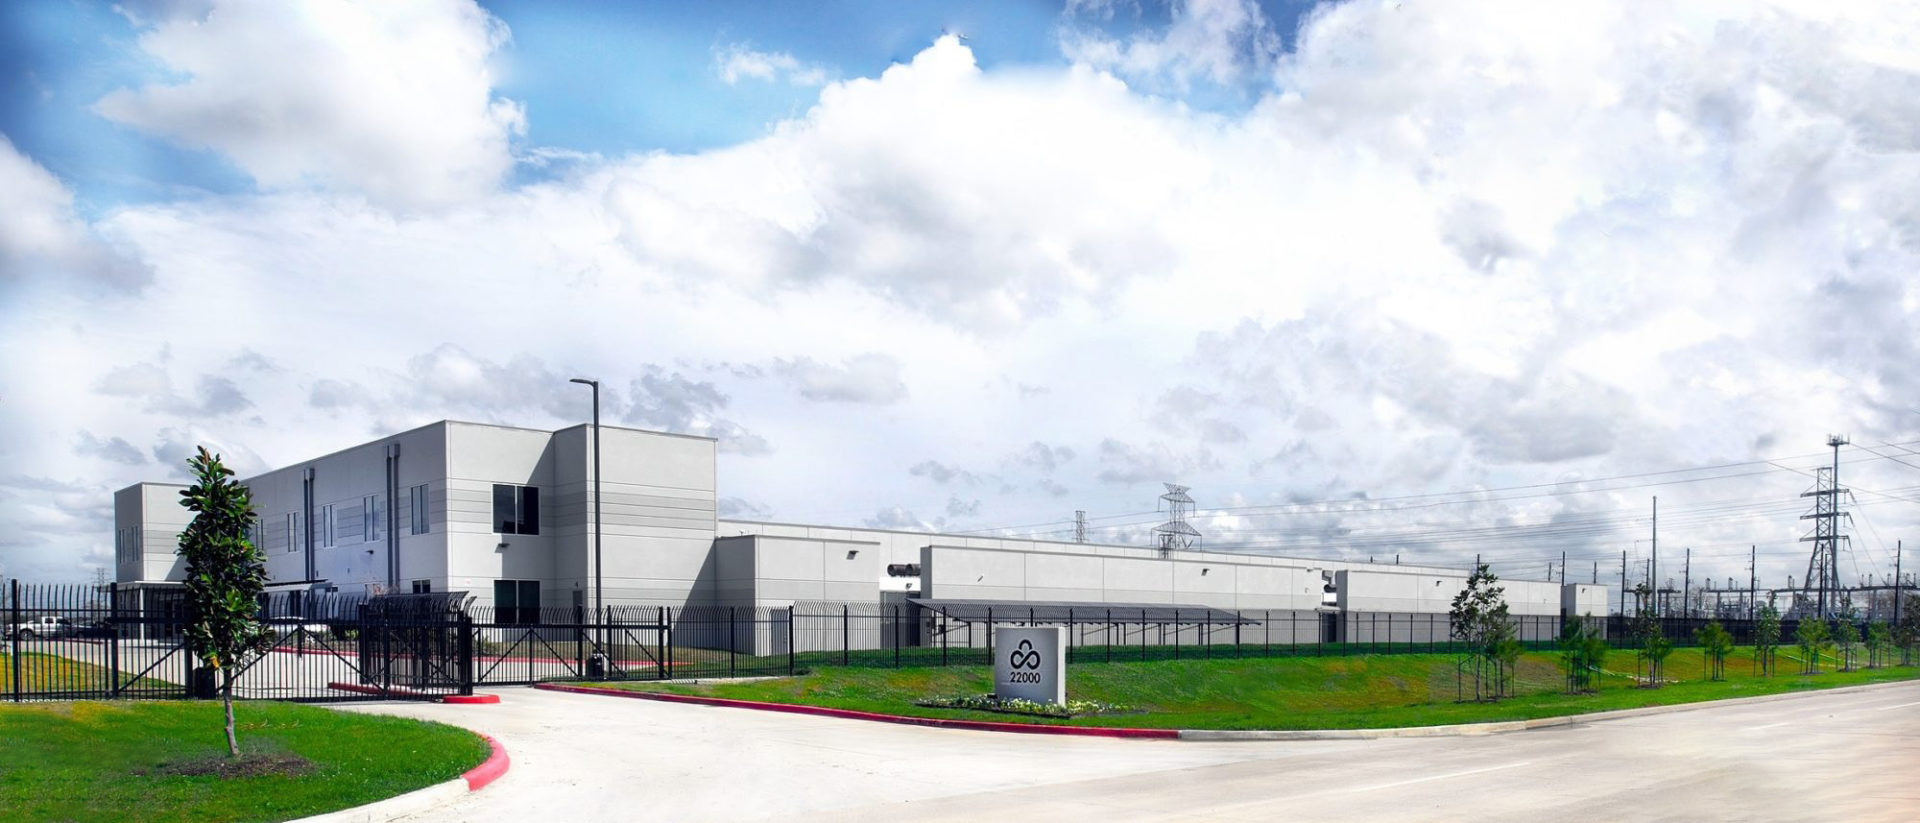 Element Critical to Expand Its Platform With The Acquisition of Skybox Datacenters’ Houston One, A High-Performance Computing Data Center